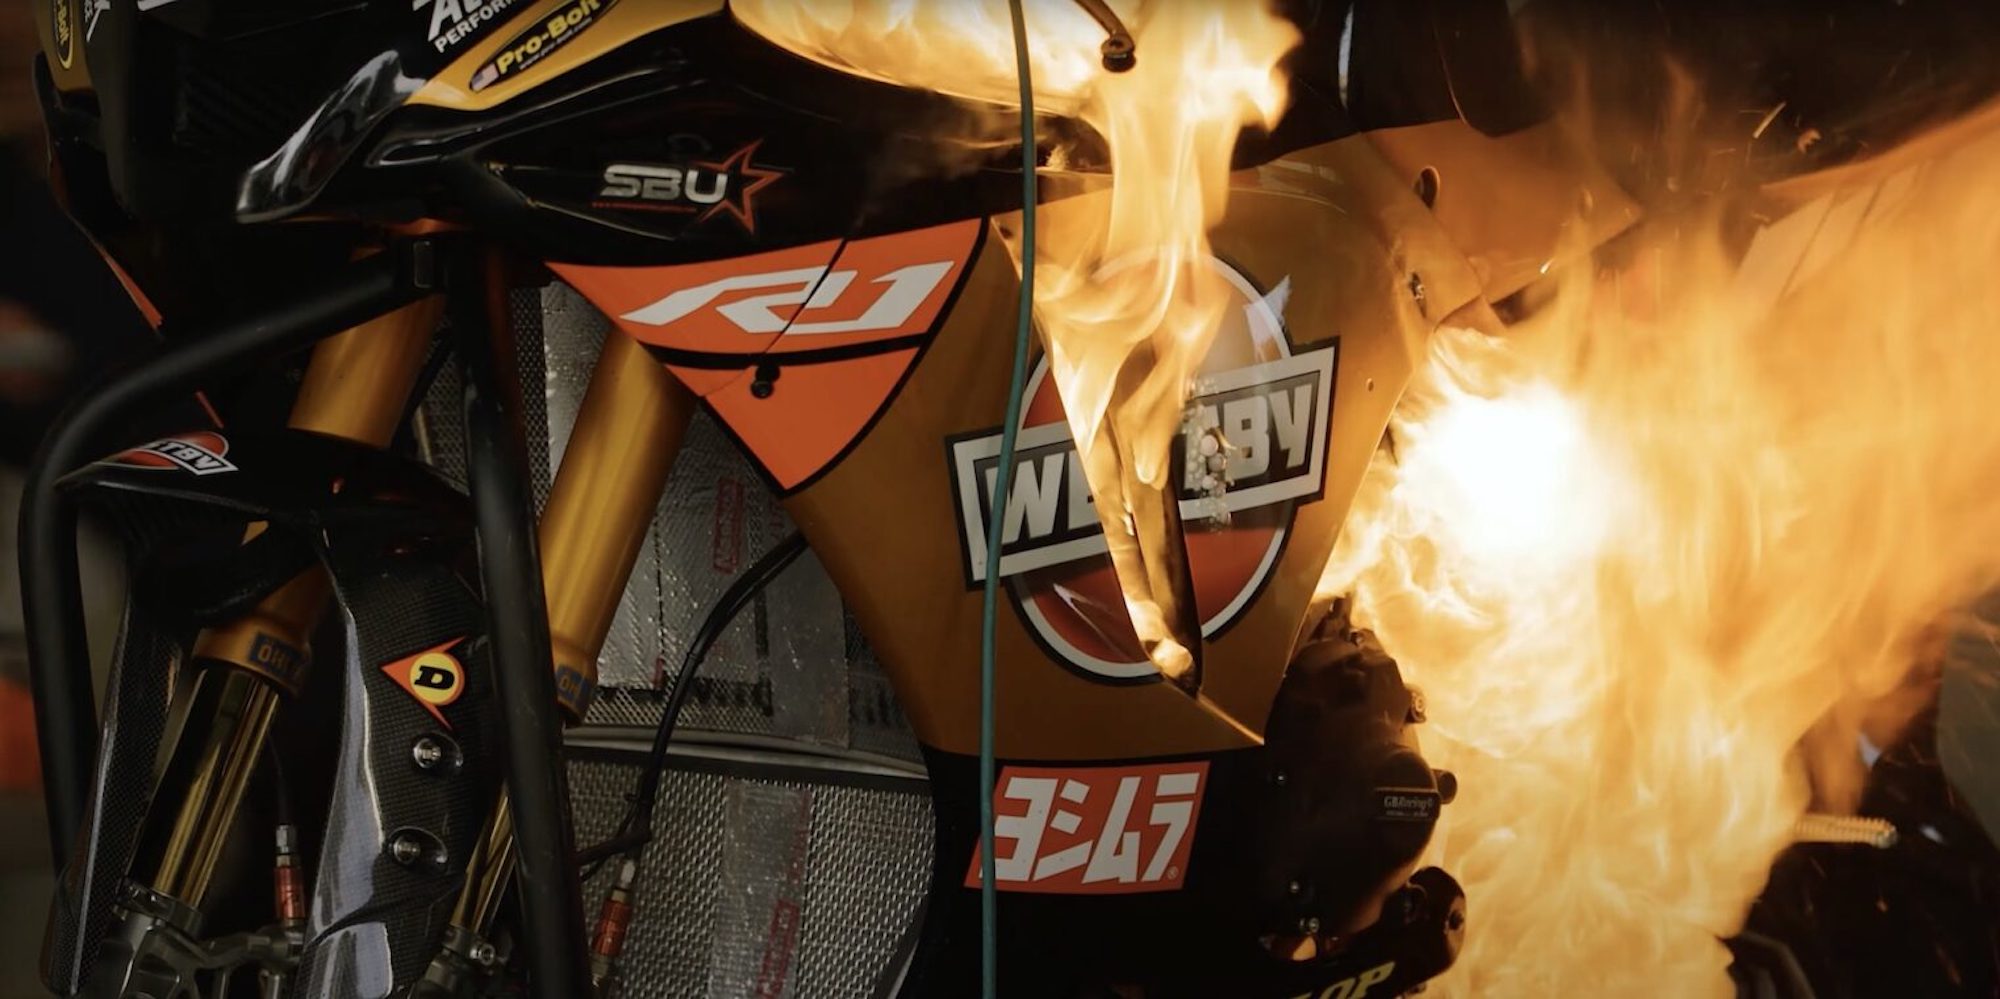 A Westby Racing bike up in flames during a MotoAmerica interview. Media sourced from Youtube. 